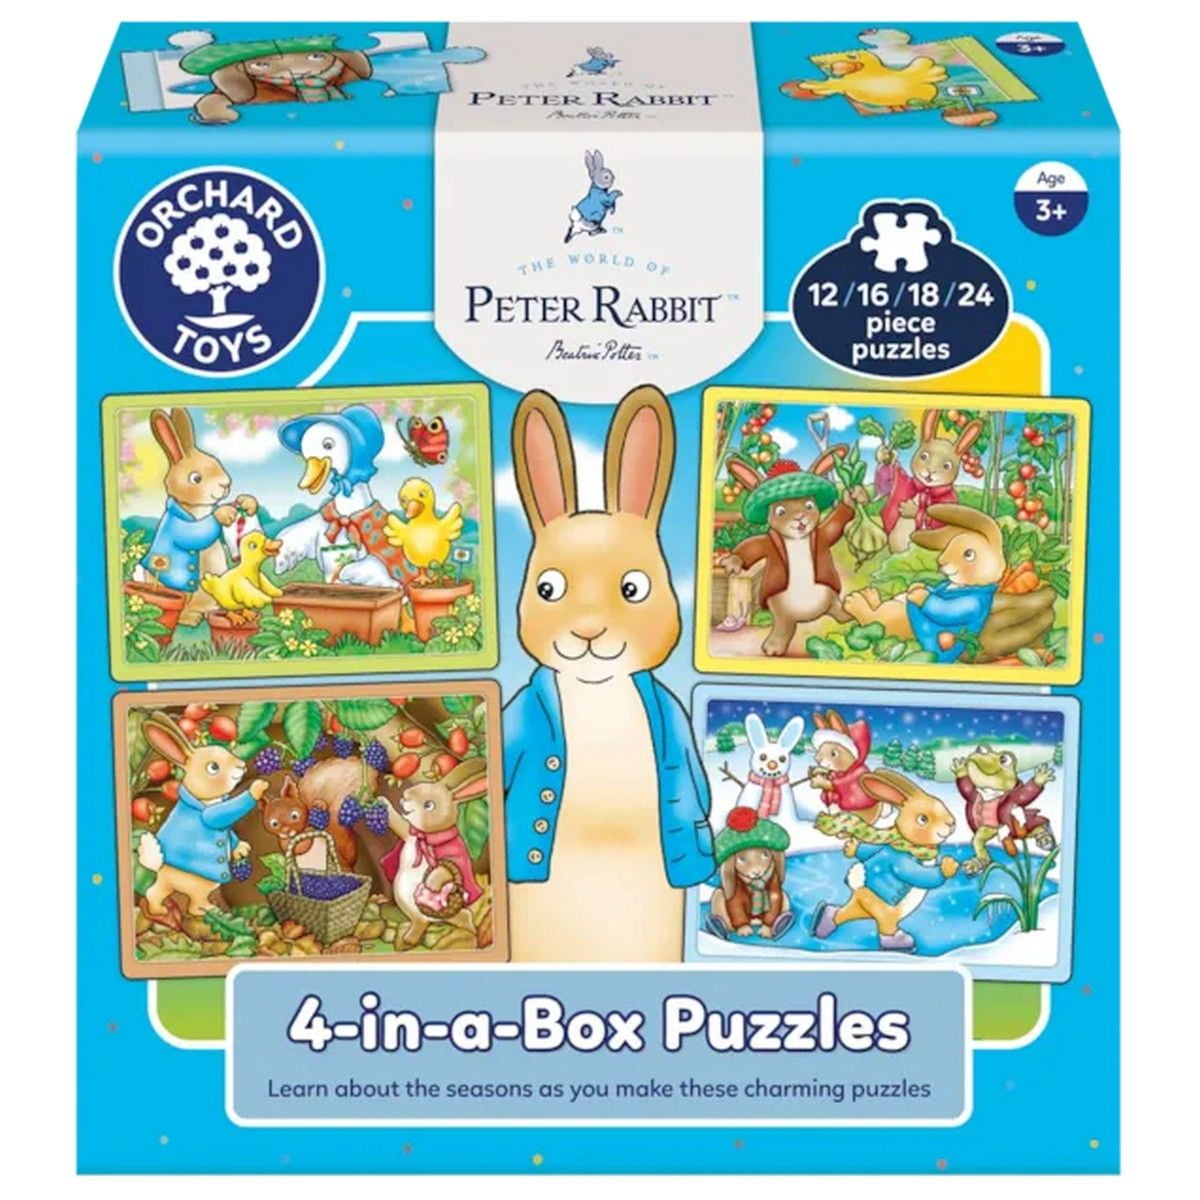 Peter Rabbit: 4-in-a-Box Puzzles